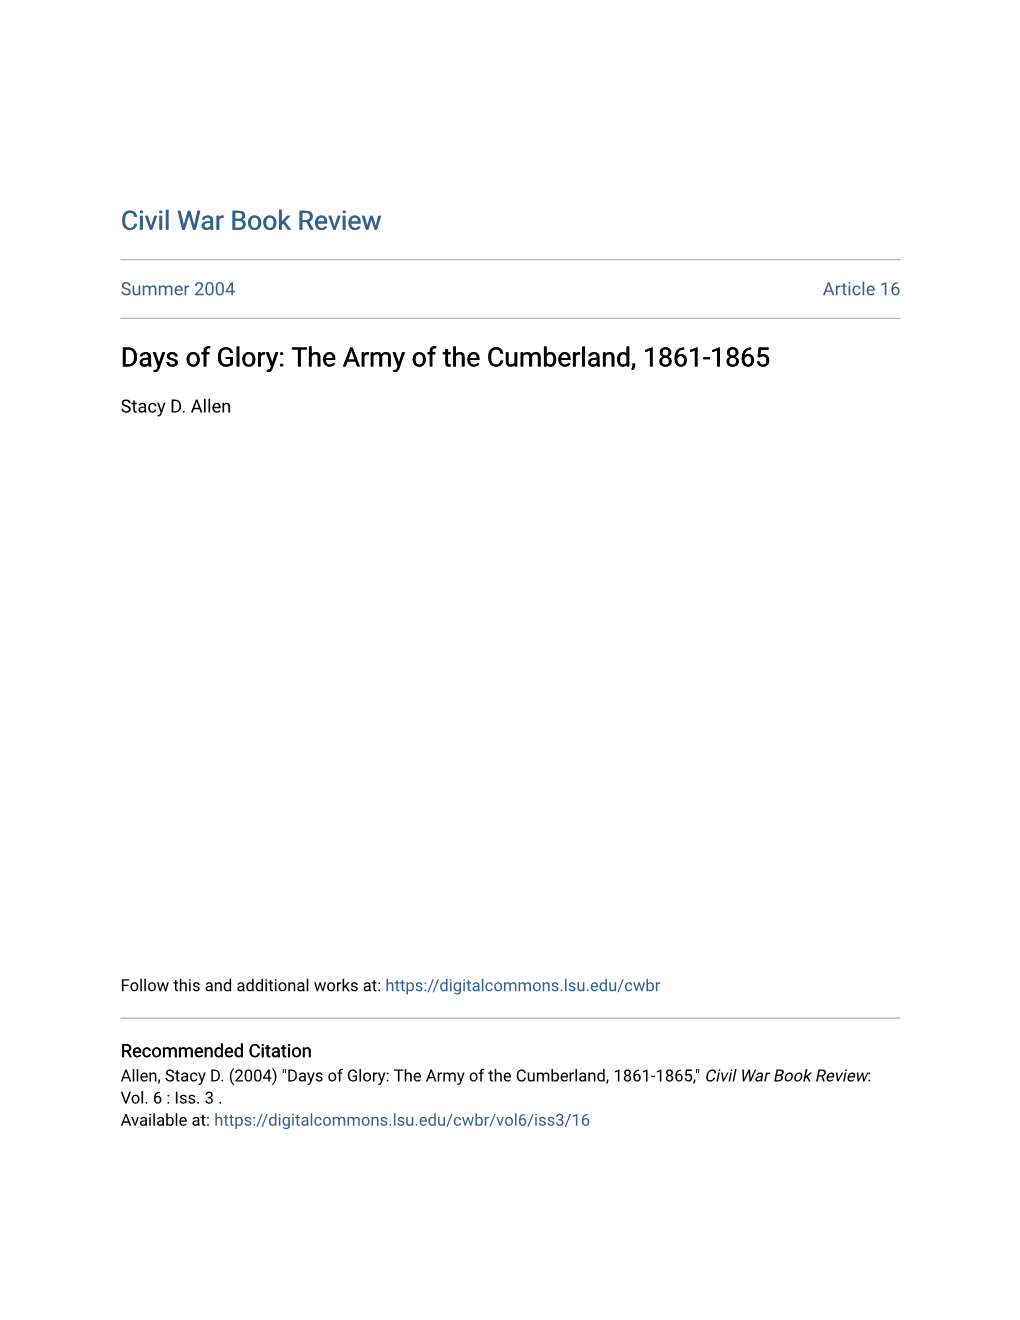 The Army of the Cumberland, 1861-1865